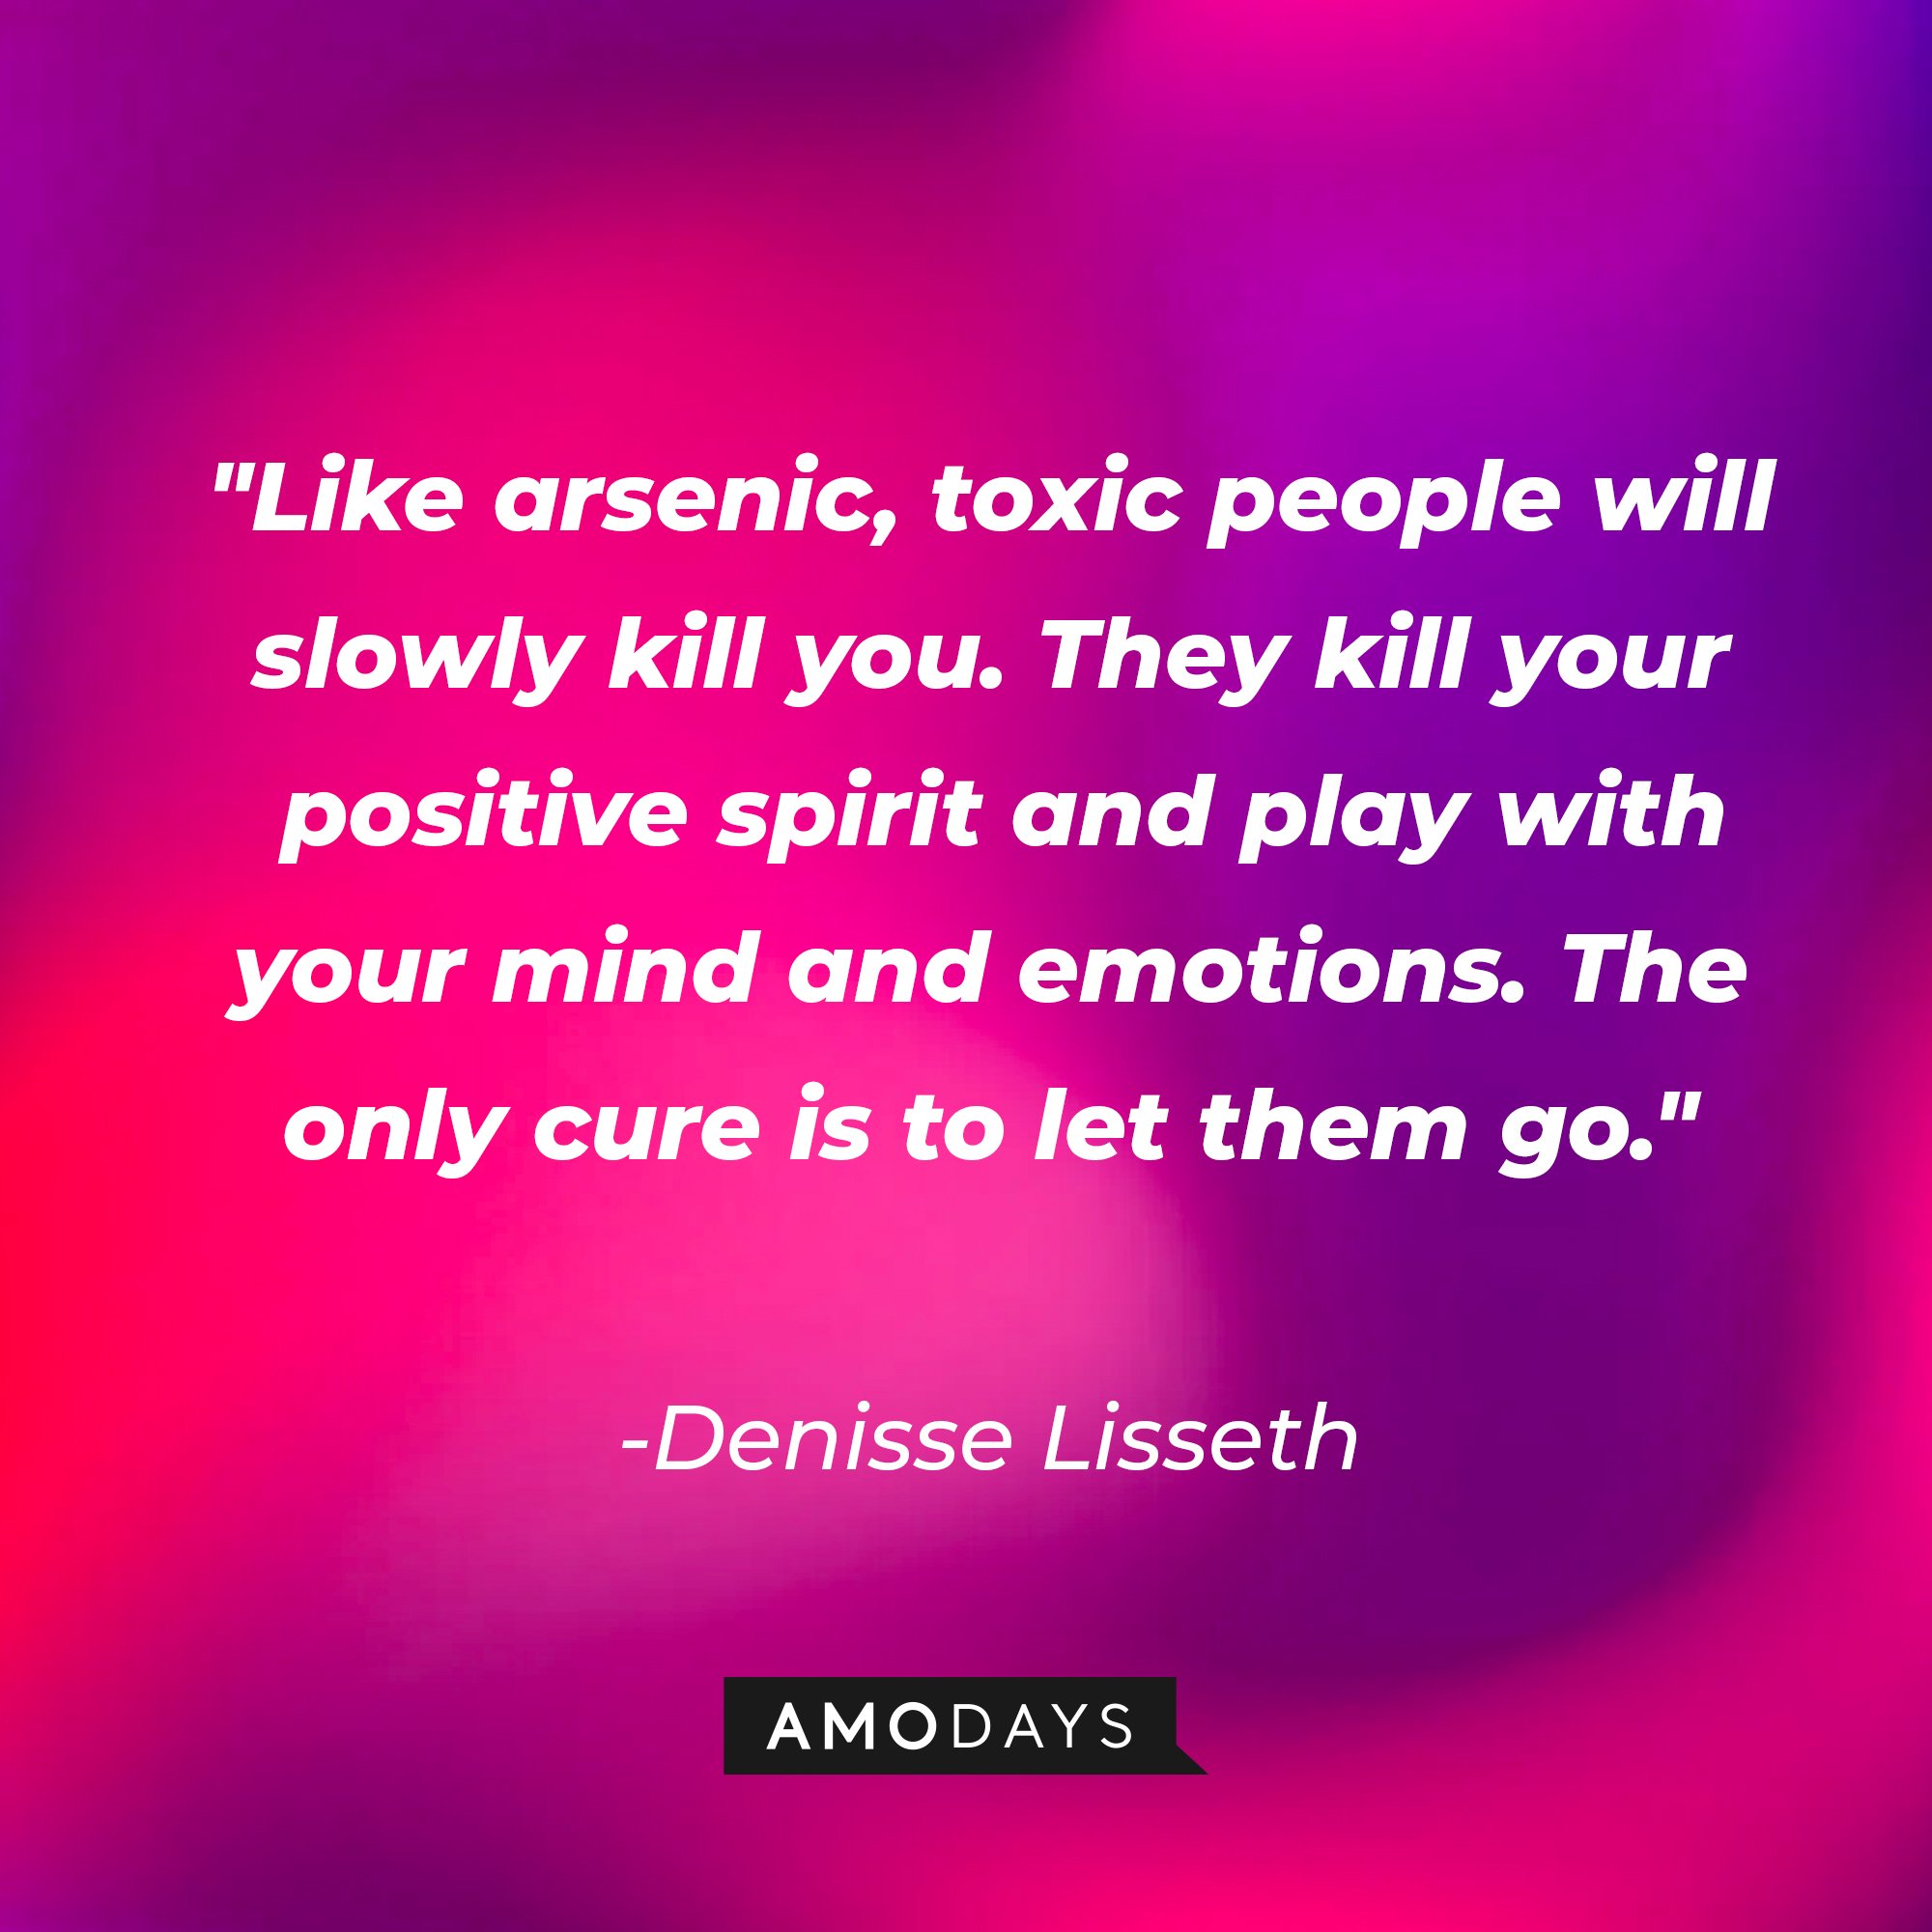 Denisse Lisseth’s quote: "Like arsenic, toxic people will slowly kill you. They kill your positive spirit and play with your mind and emotions. The only cure is to let them go." | Image: AmoDays 